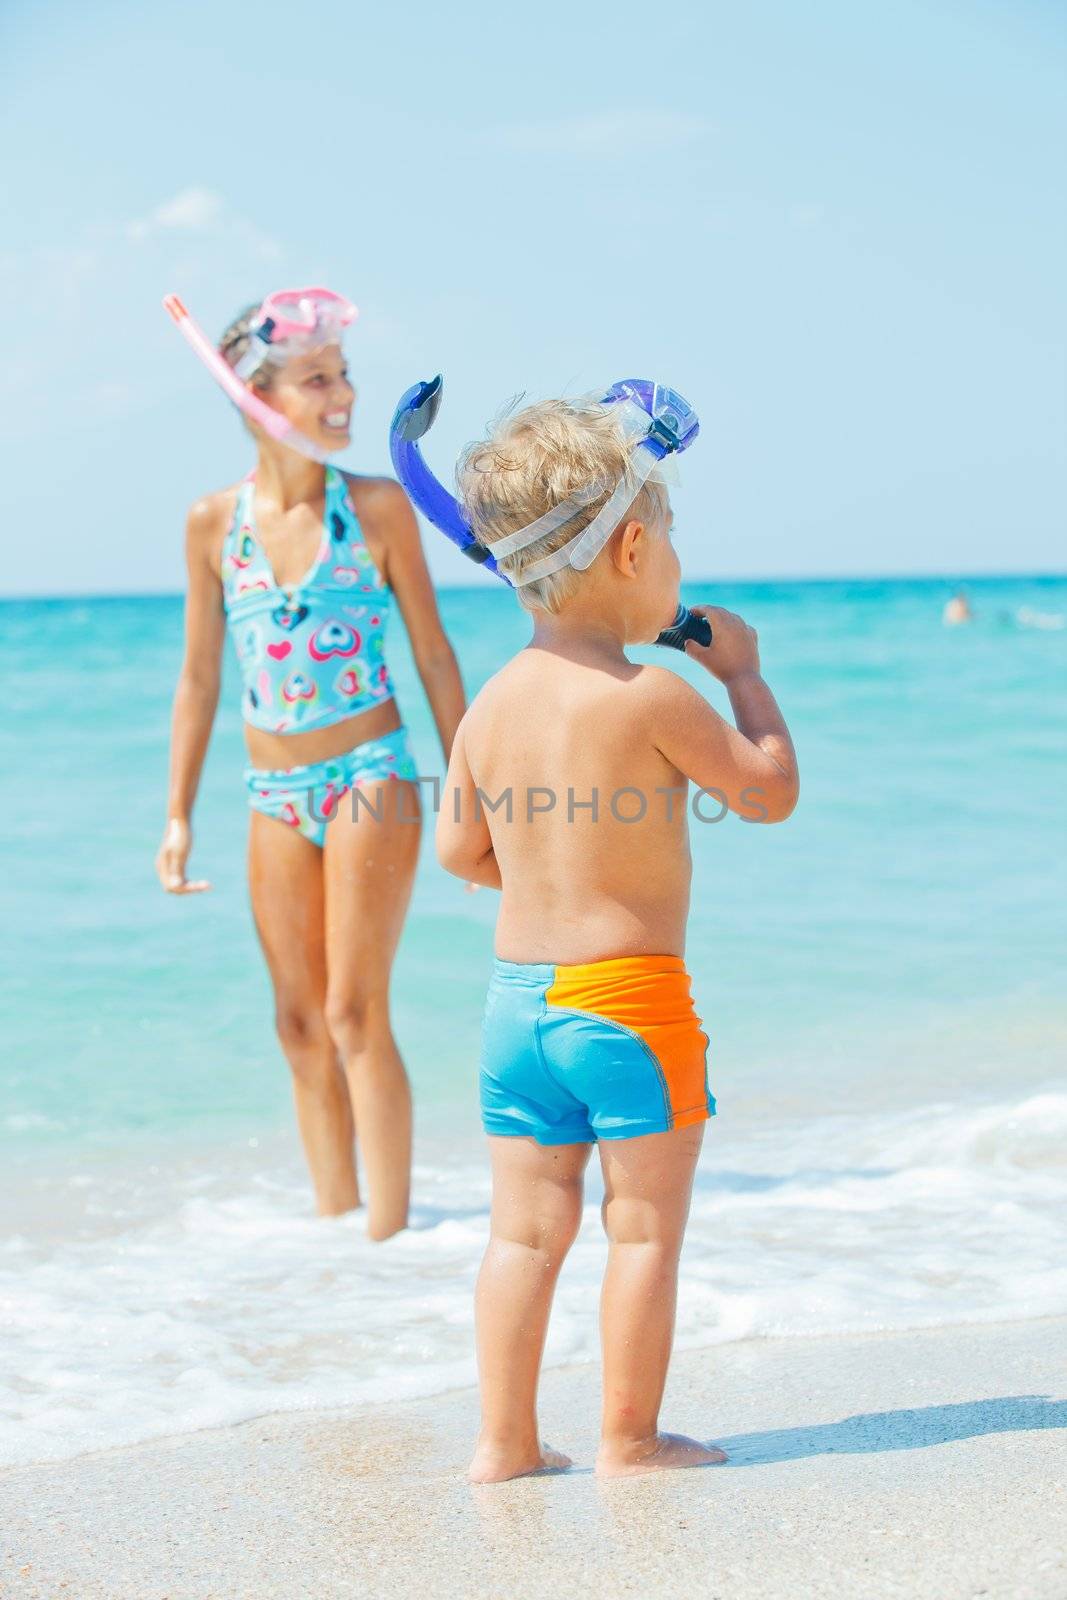 Happy young boy with snorkeling equipment on sandy tropical beach, his sister background. Vertical view